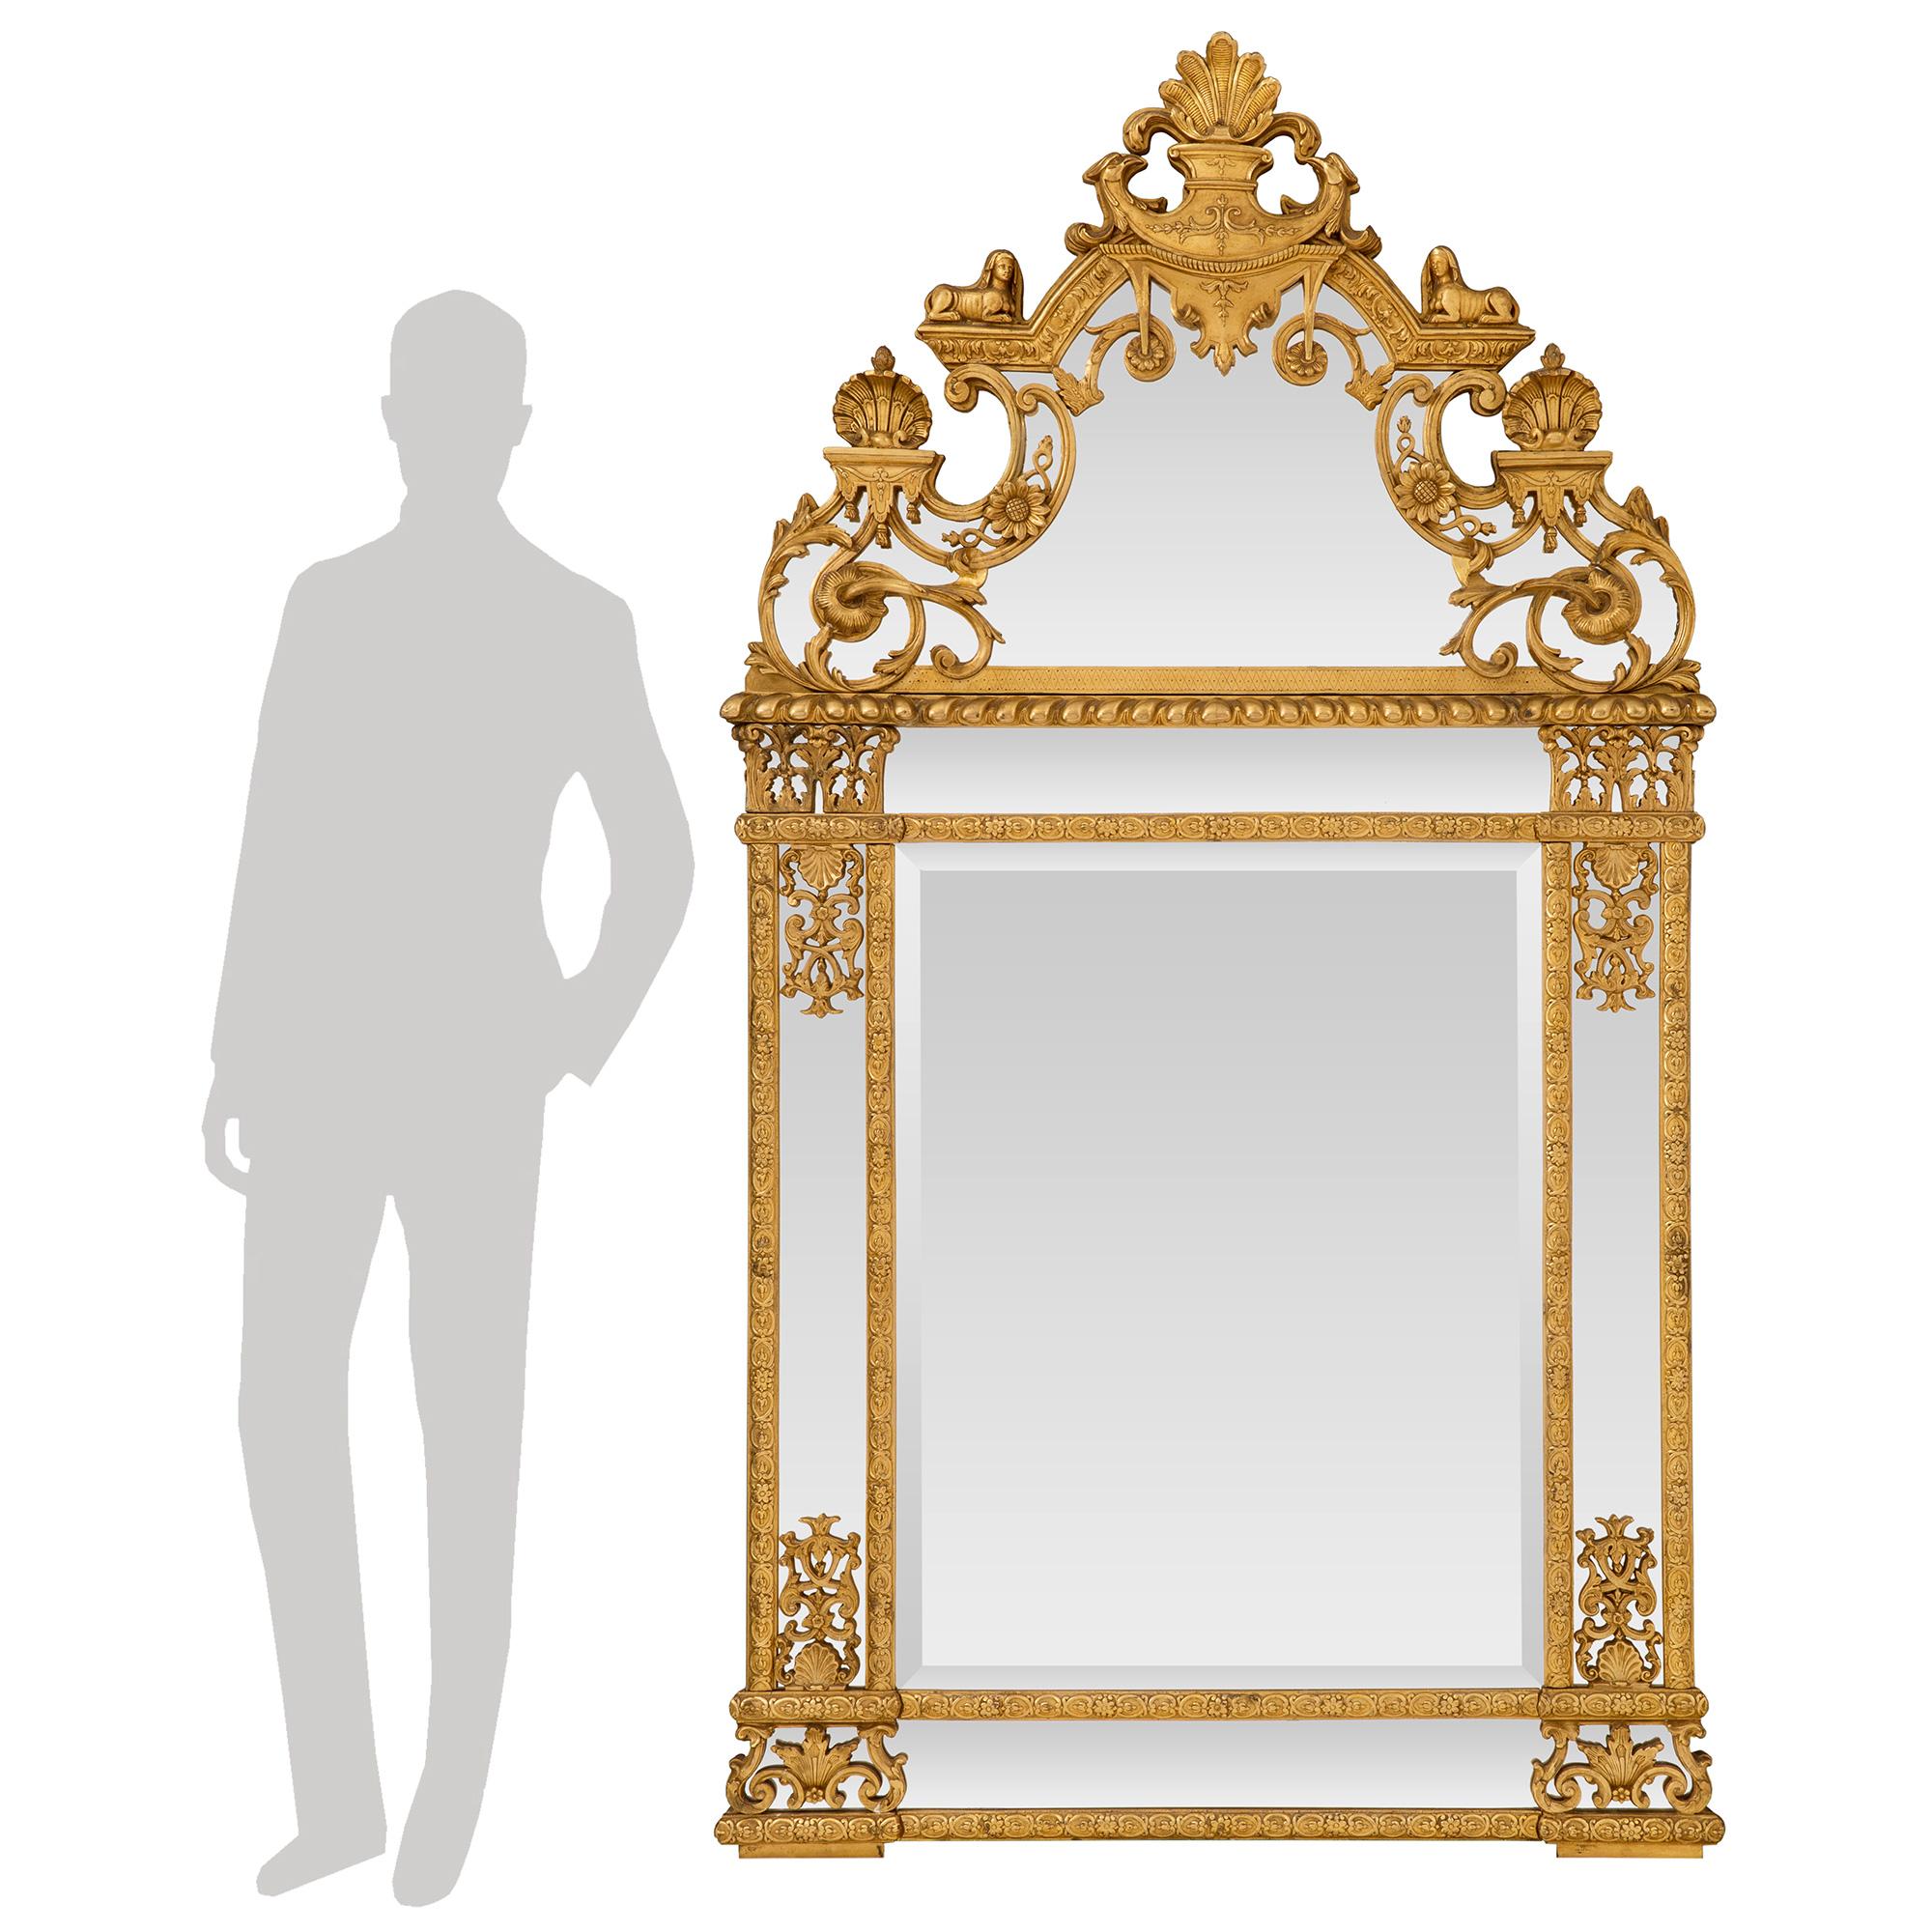 A stunning French 19th century Egyptian revival Neo-Classical st. giltwood double framed mirror. The original beveled mirror plate is framed within a finely carved foliate border. At the base and borders are additional original mirror plates also